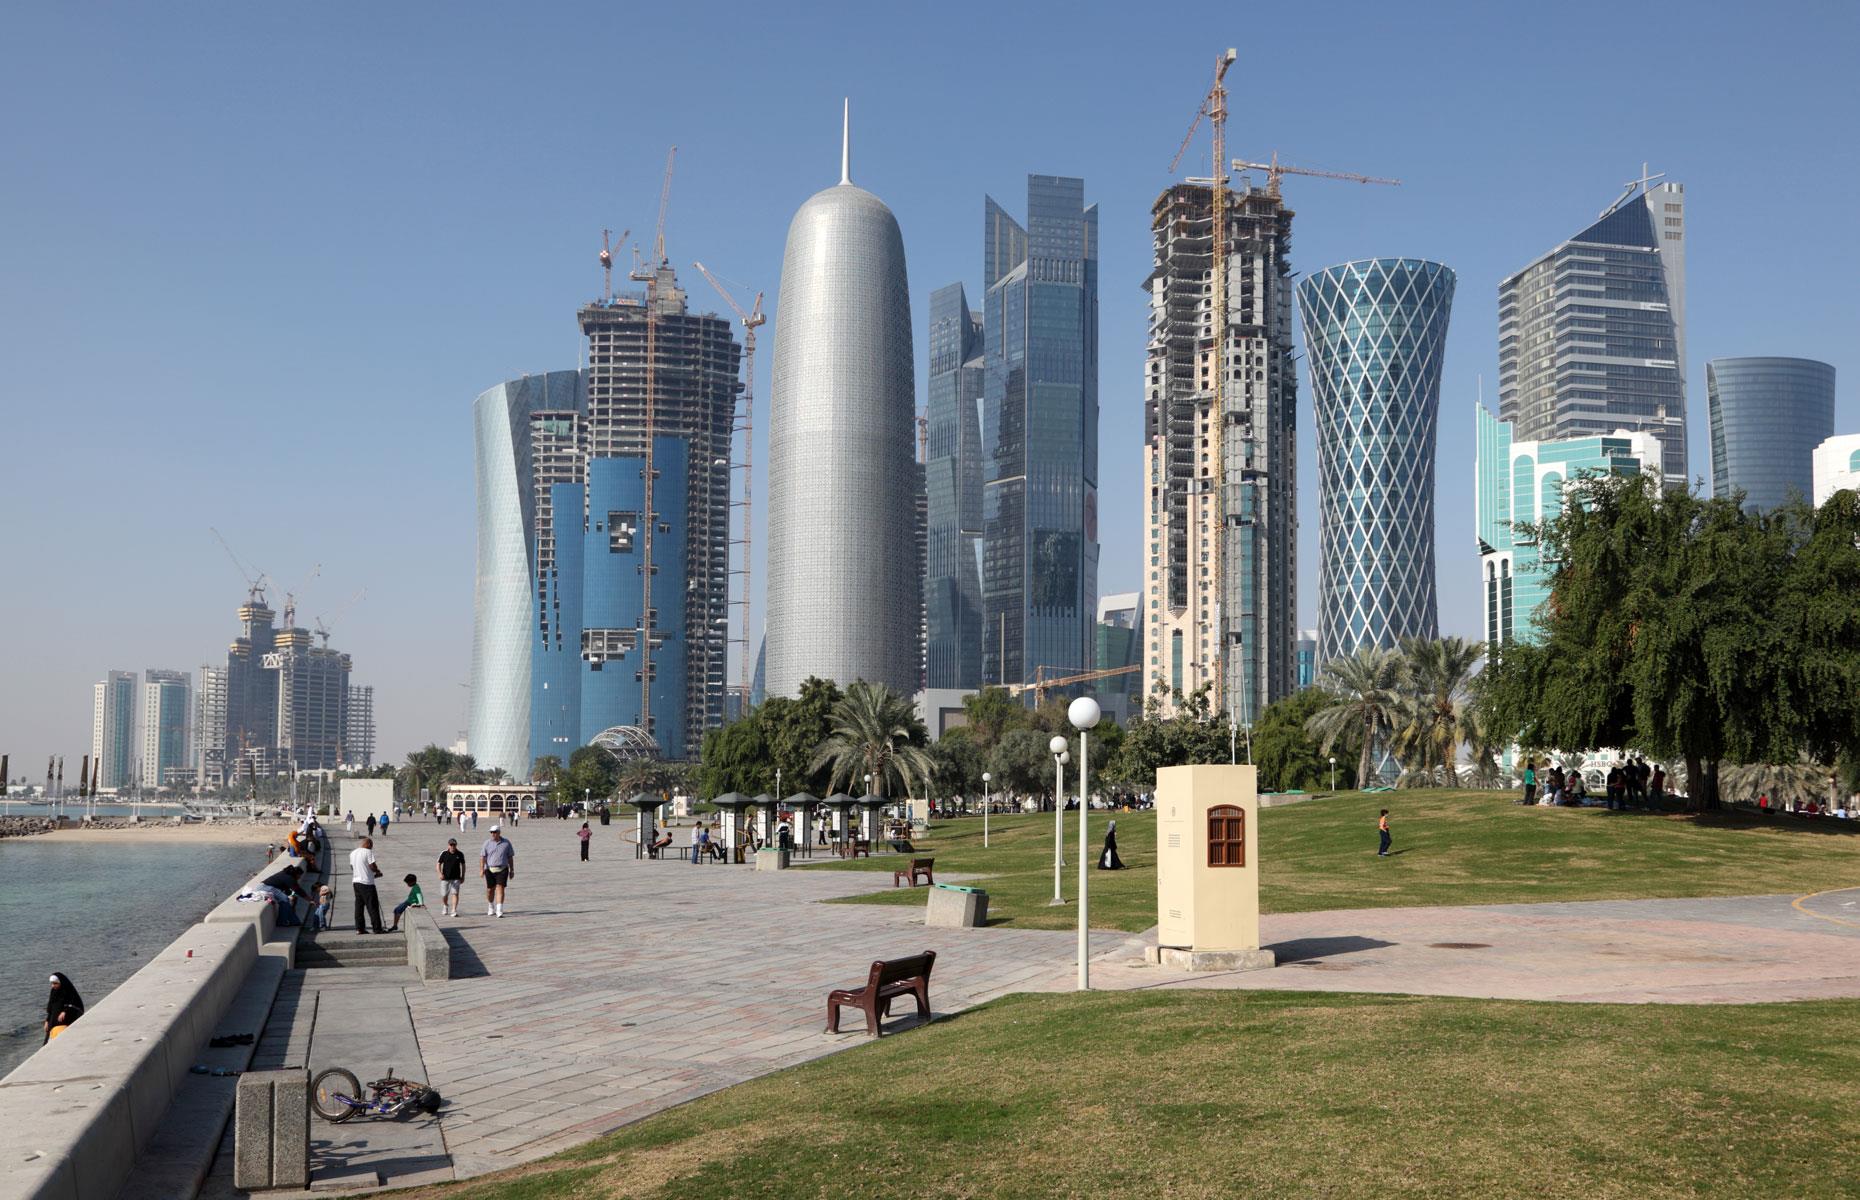 <p>Since 1997, real GDP growth has peaked at an astonishing 30%. Qatar has put more of a focus on natural gas extraction and, like Saudi Arabia, is keen to diversify its economy. However, oil is still a huge money-maker for the nation.</p>  <p>Today, Qatar boasts one of the highest GDP per capita in the world at around $87,974 (£69.2k) – putting it way ahead of the likes of Canada, France and Australia.</p>